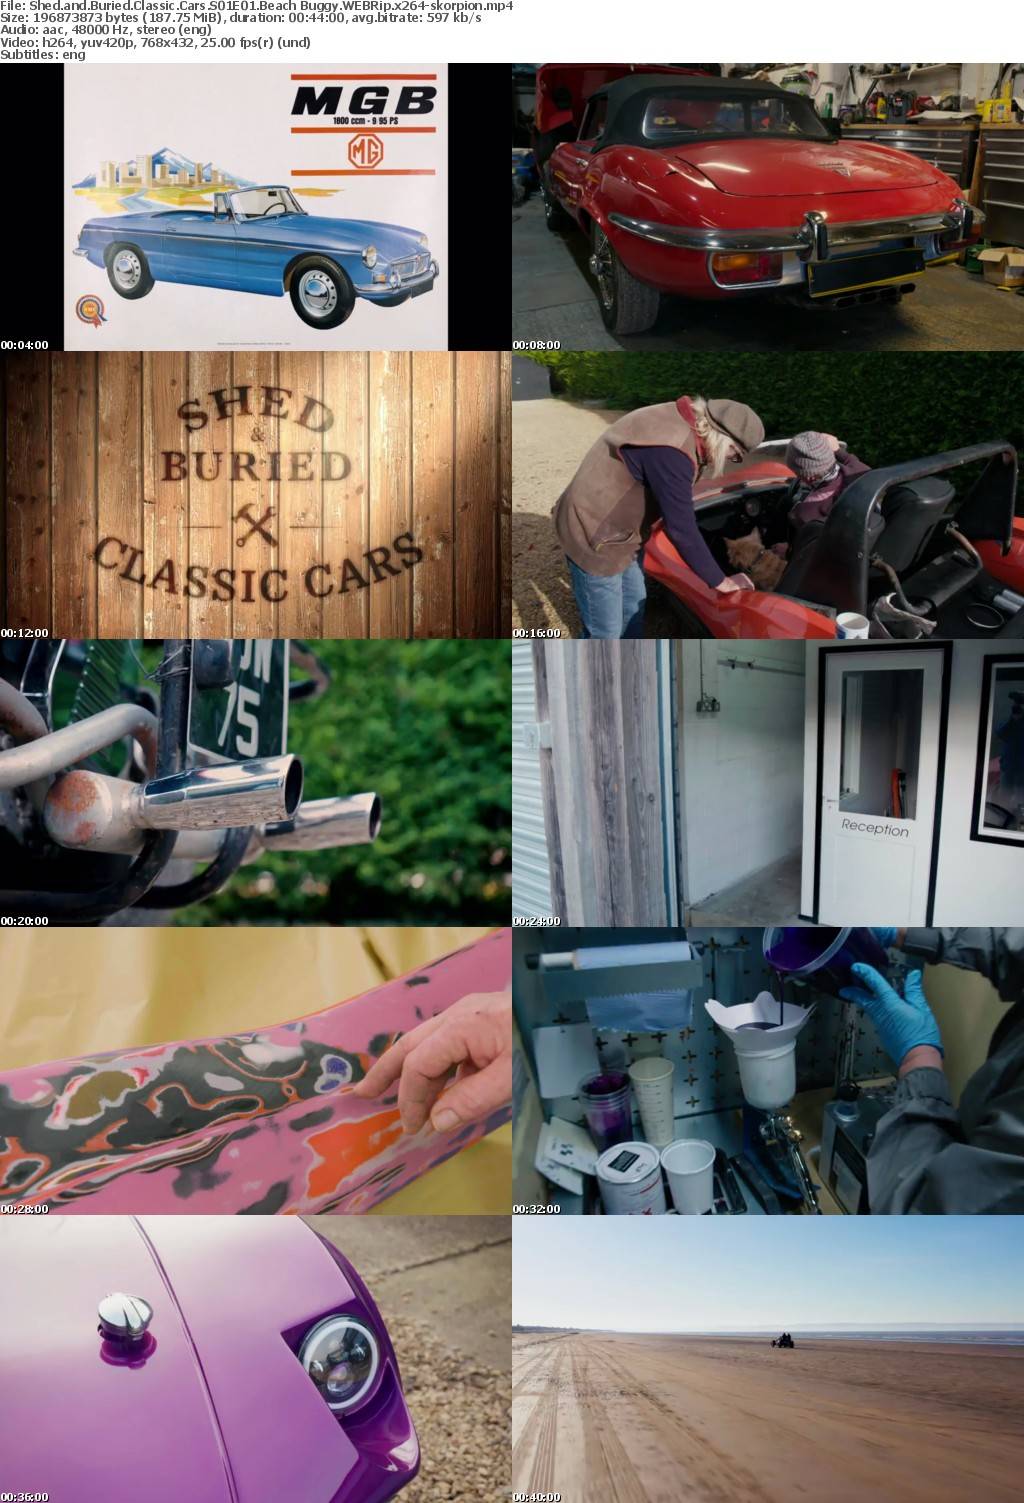 Shed and Buried Classic Cars S01E01 Beach Buggy WEBRip x264-skorpion mp4